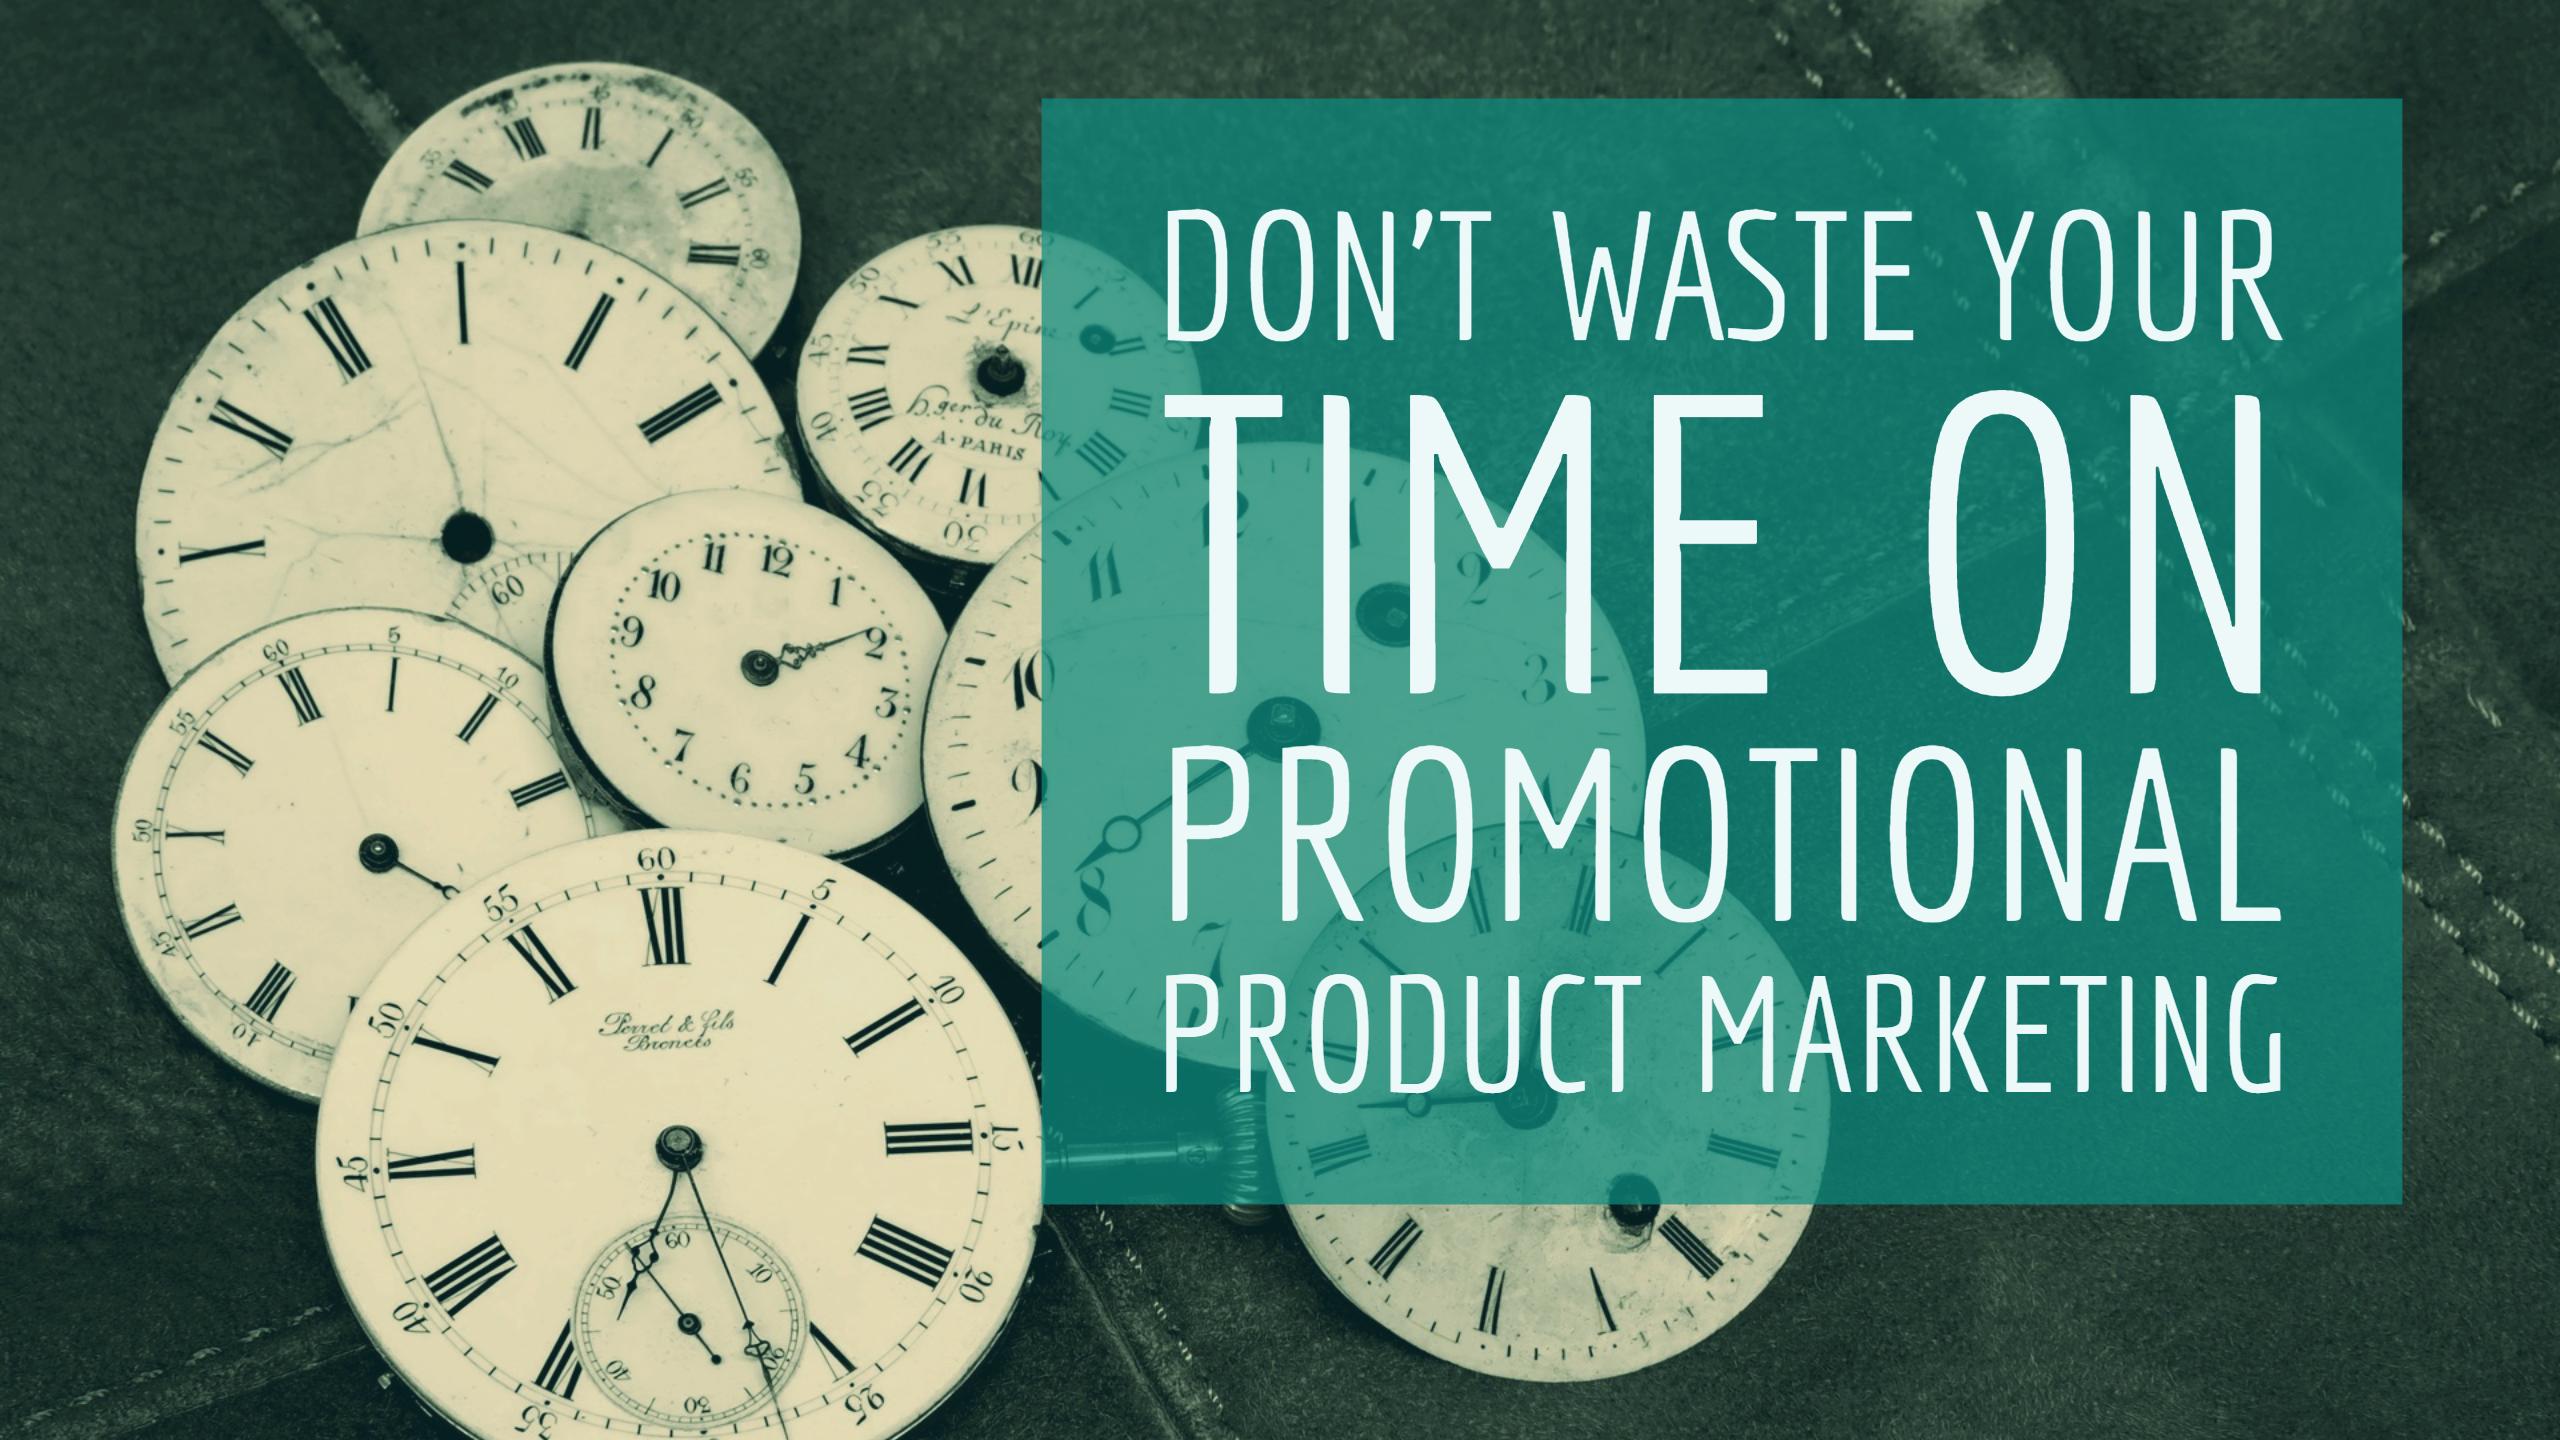 Are you using promotional product marketing well?